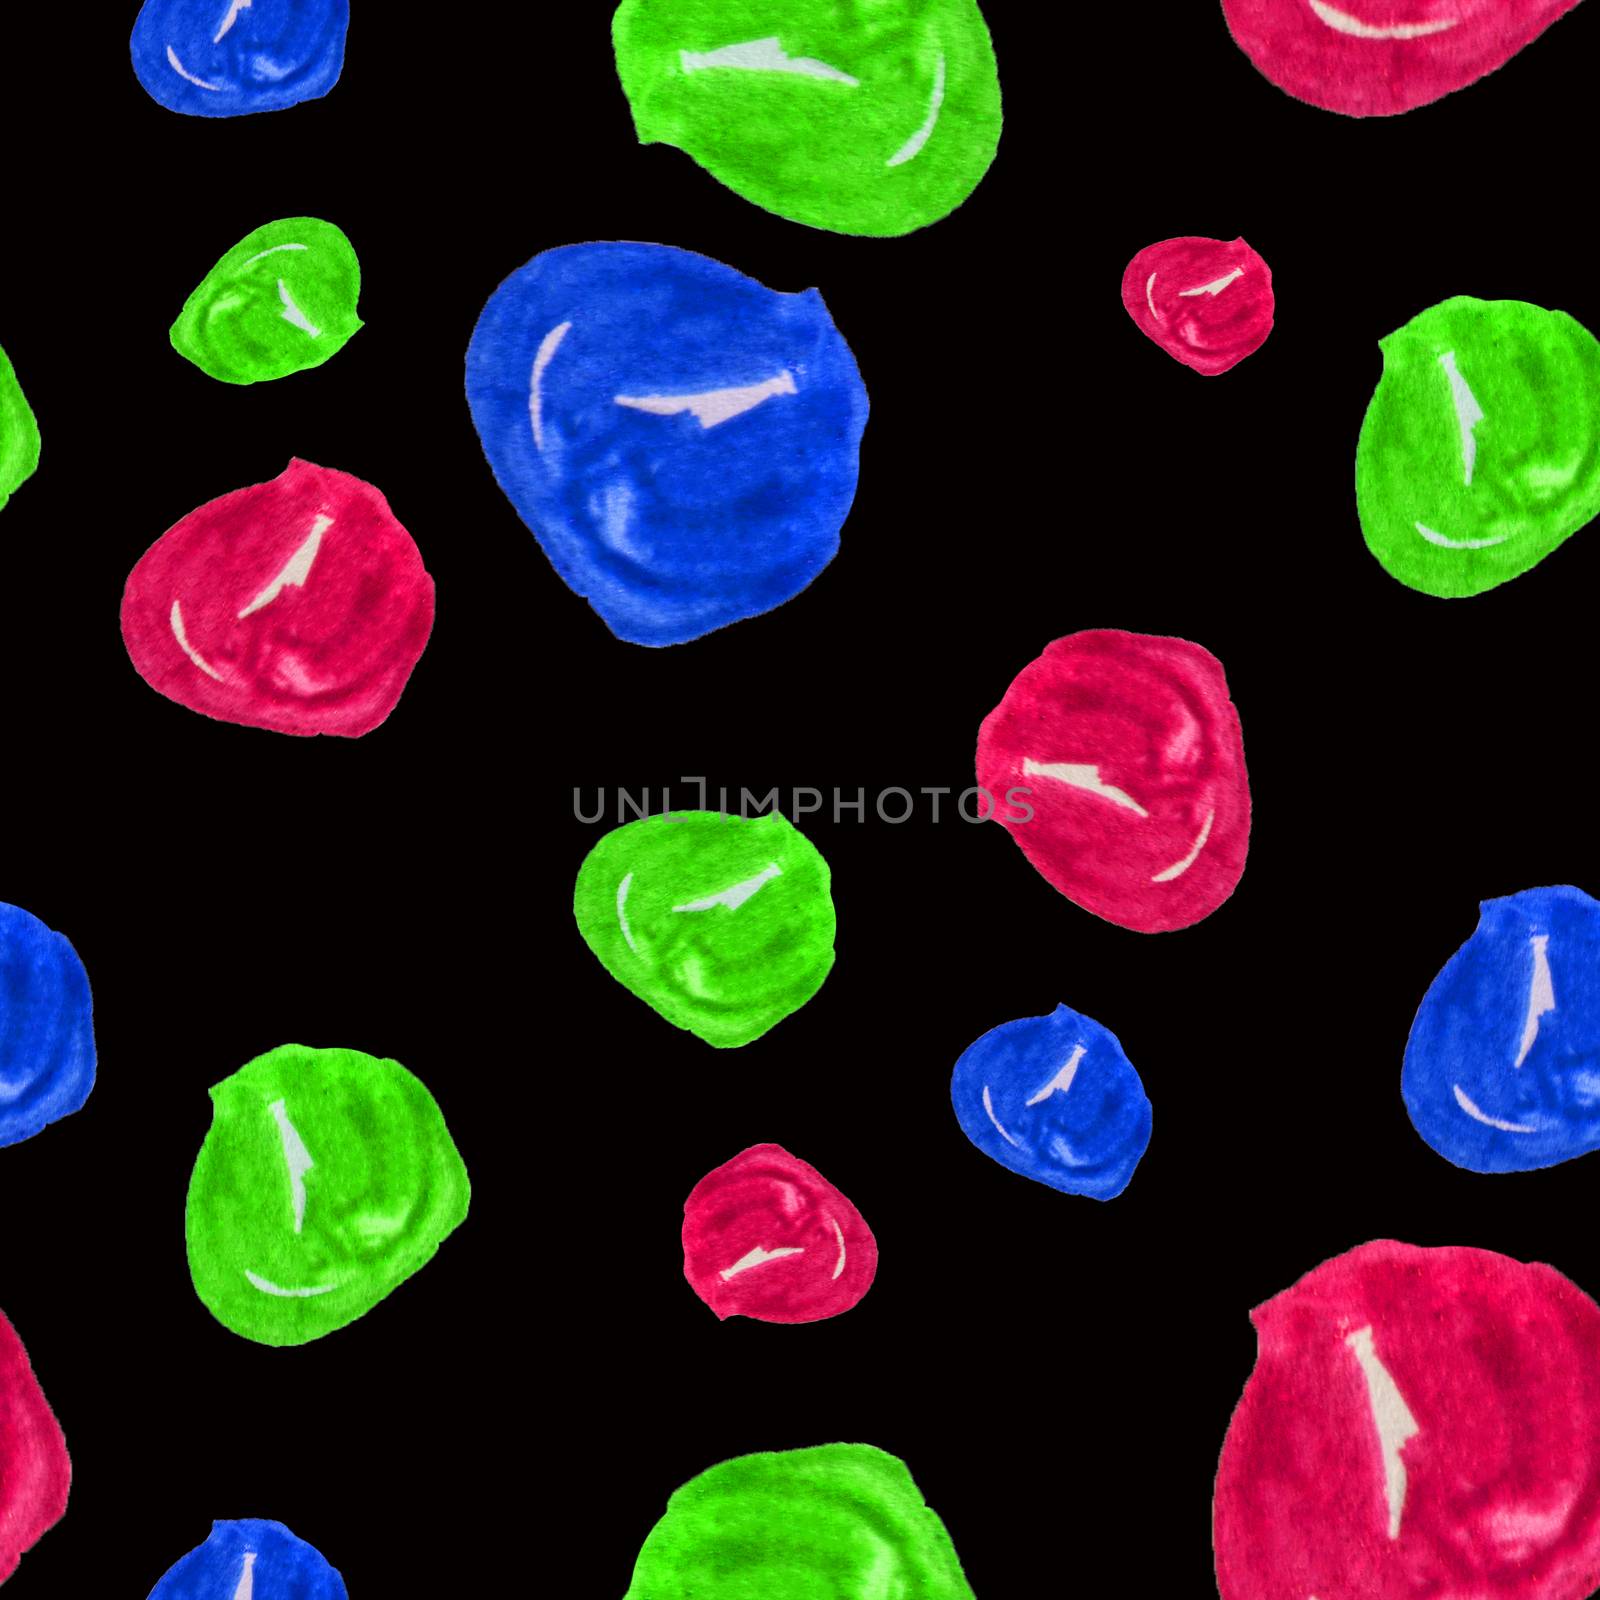 Hand drawn seamless watercolor background illustration of colorful beads on black background. Colorful illustration with decorative Wallpaper.